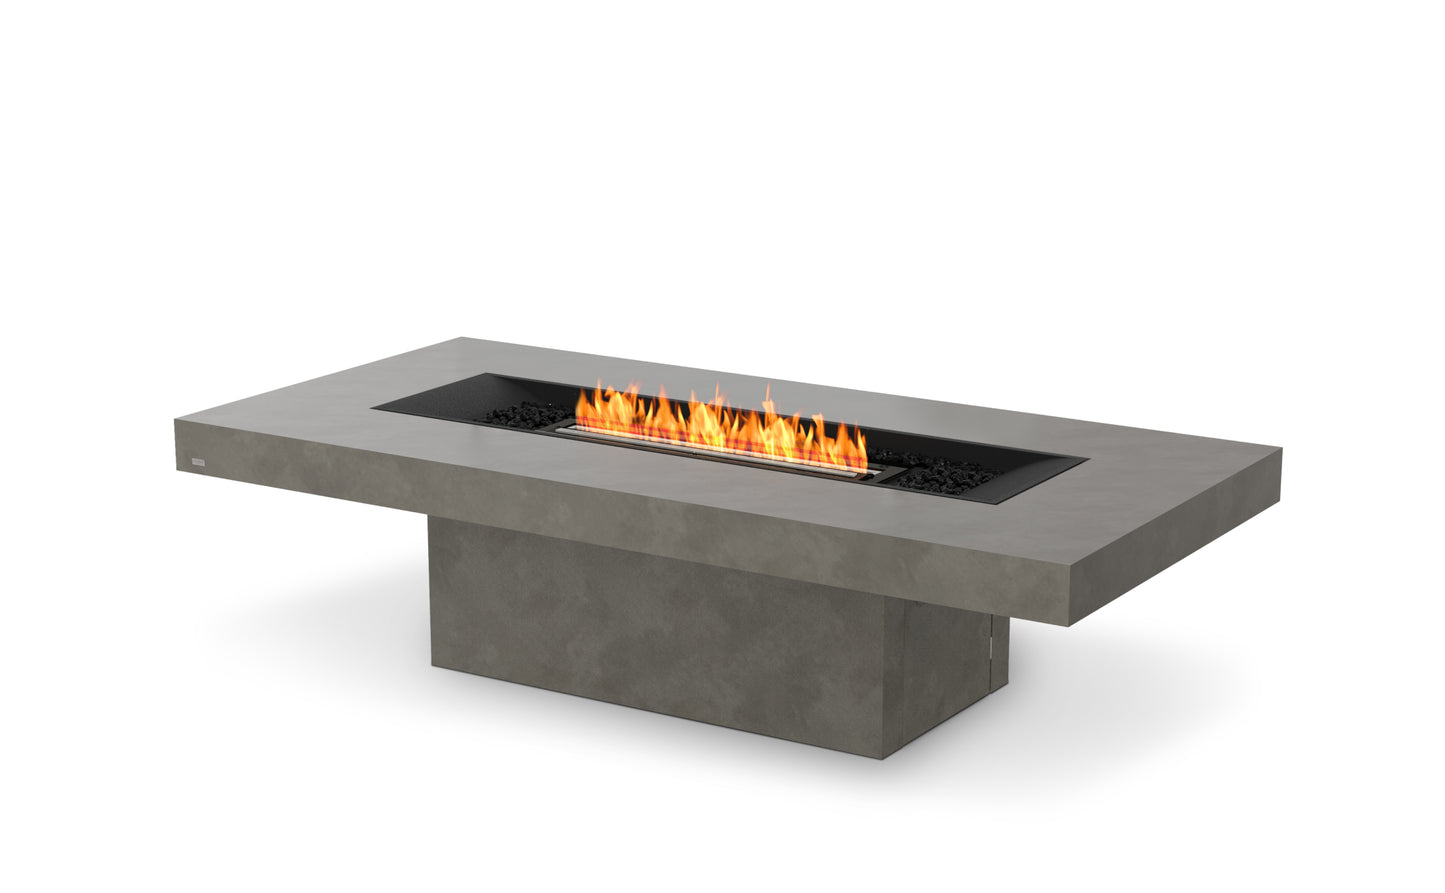 EcoSmart Fire Gin (Chat) Fire Pit Table with Bioethanol Sustainable Fuel - PadioLiving - EcoSmart Fire Gin (Chat) Fire Pit Table with Bioethanol Sustainable Fuel - Fire Pit - PadioLiving